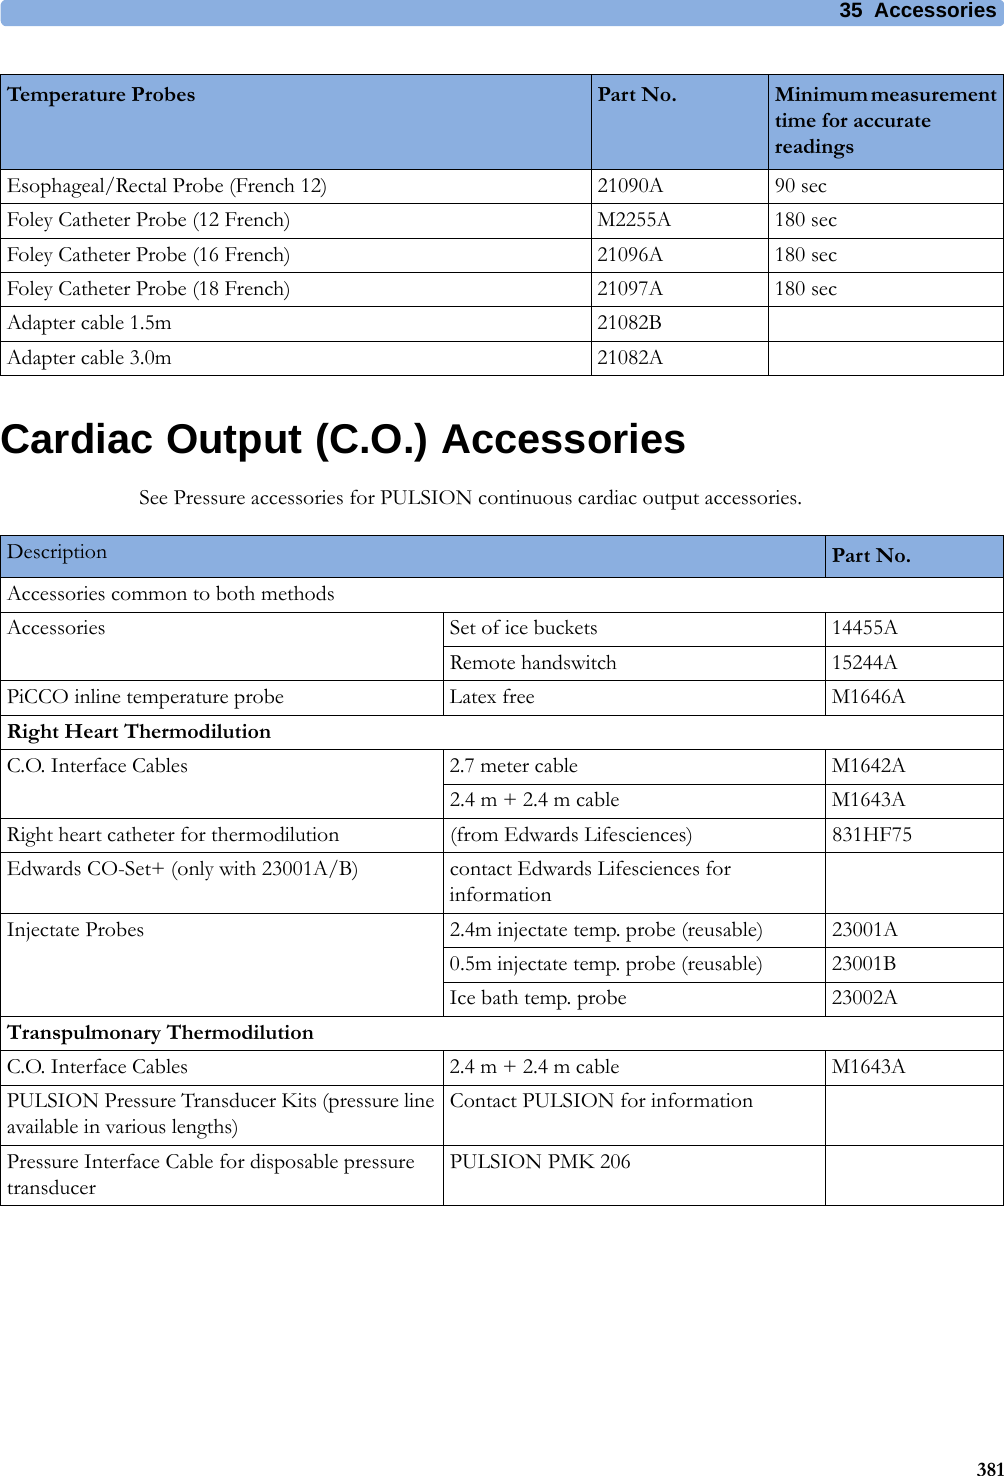 35 Accessories381Cardiac Output (C.O.) AccessoriesSee Pressure accessories for PULSION continuous cardiac output accessories.Esophageal/Rectal Probe (French 12) 21090A 90 secFoley Catheter Probe (12 French) M2255A 180 secFoley Catheter Probe (16 French) 21096A 180 secFoley Catheter Probe (18 French) 21097A 180 secAdapter cable 1.5m 21082BAdapter cable 3.0m 21082ATemperature Probes Part No. Minimum measurement time for accurate readingsDescription Part No.Accessories common to both methodsAccessories Set of ice buckets 14455ARemote handswitch 15244APiCCO inline temperature probe Latex free M1646ARight Heart ThermodilutionC.O. Interface Cables 2.7 meter cable M1642A2.4 m + 2.4 m cable M1643ARight heart catheter for thermodilution (from Edwards Lifesciences) 831HF75Edwards CO-Set+ (only with 23001A/B) contact Edwards Lifesciences for informationInjectate Probes 2.4m injectate temp. probe (reusable) 23001A0.5m injectate temp. probe (reusable) 23001BIce bath temp. probe 23002ATranspulmonary ThermodilutionC.O. Interface Cables 2.4 m + 2.4 m cable M1643APULSION Pressure Transducer Kits (pressure line available in various lengths)Contact PULSION for informationPressure Interface Cable for disposable pressure transducerPULSION PMK 206